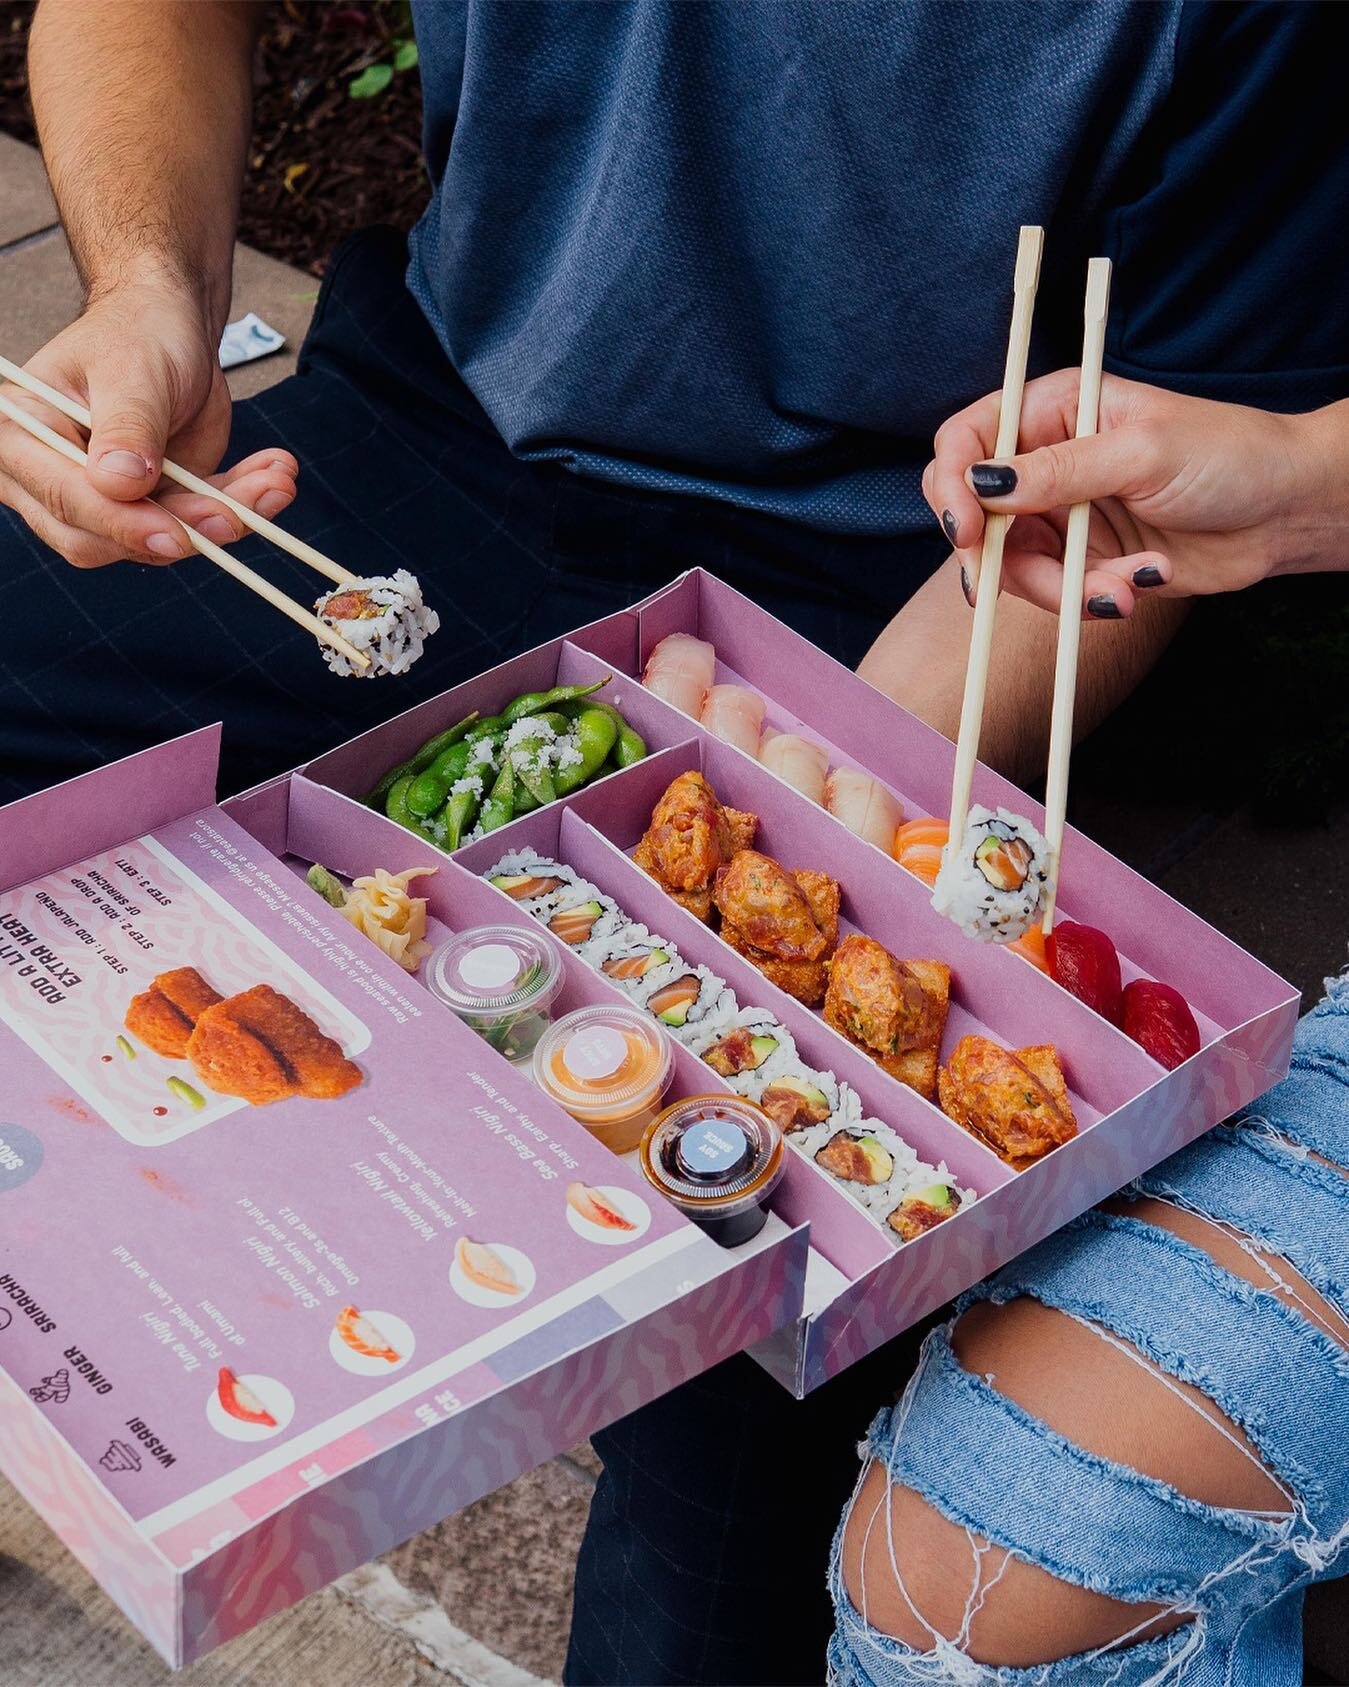 🍣 Dinner for Two IG Giveaway! 🍣

Who would you want to share this box with? 🌸🍣&nbsp; We&rsquo;re hooking up two random comments with a box on us to try Cleveland&rsquo;s first elevated sushi experience! 🥳 (If you check our link in Bio we also pi